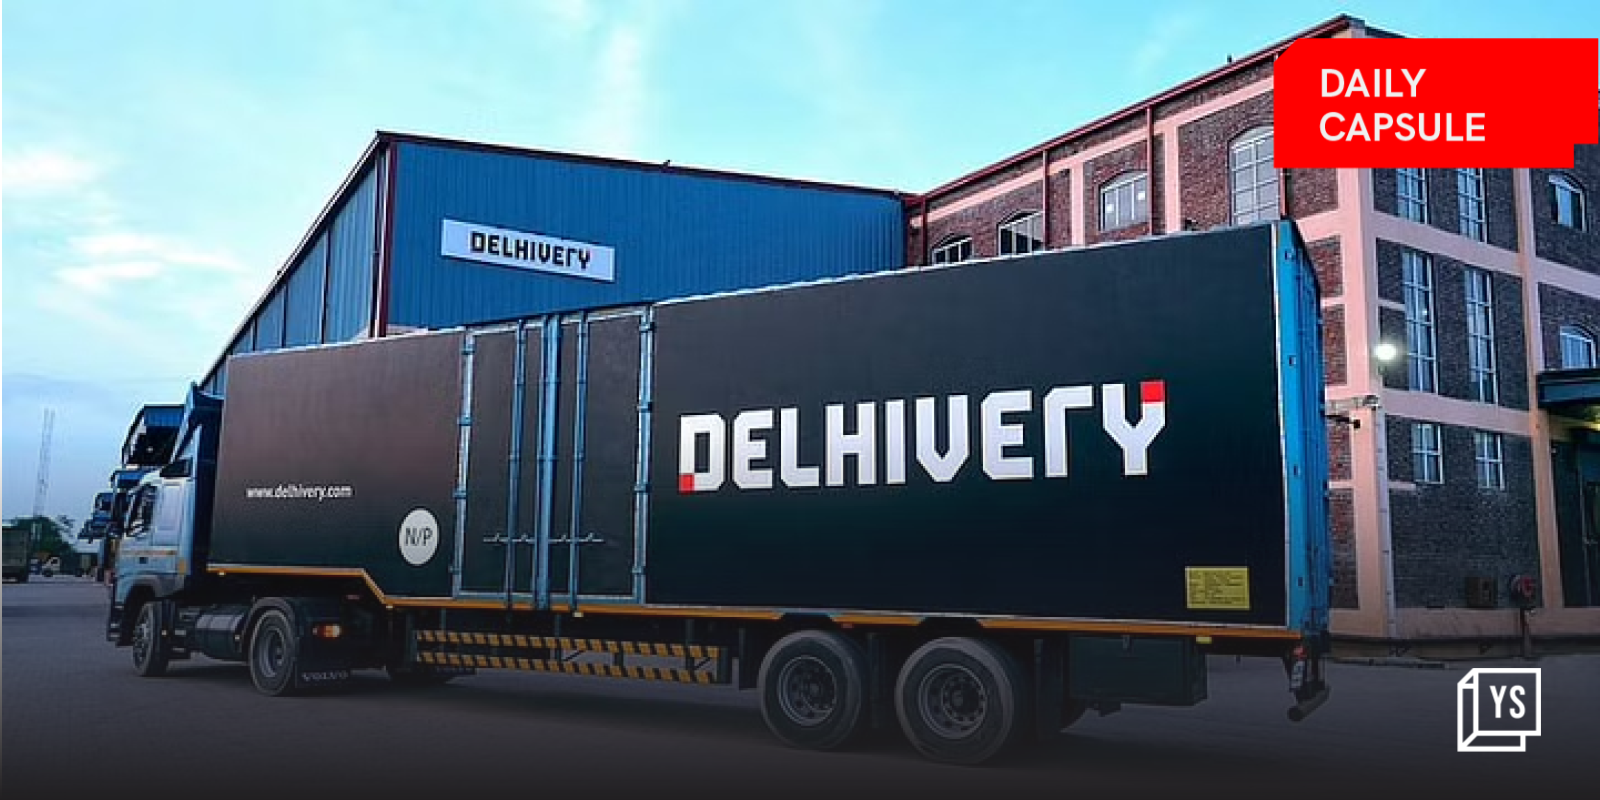 Delhivery’s Q2 losses narrow, revenues grow; What does cricket in the Olympics mean?